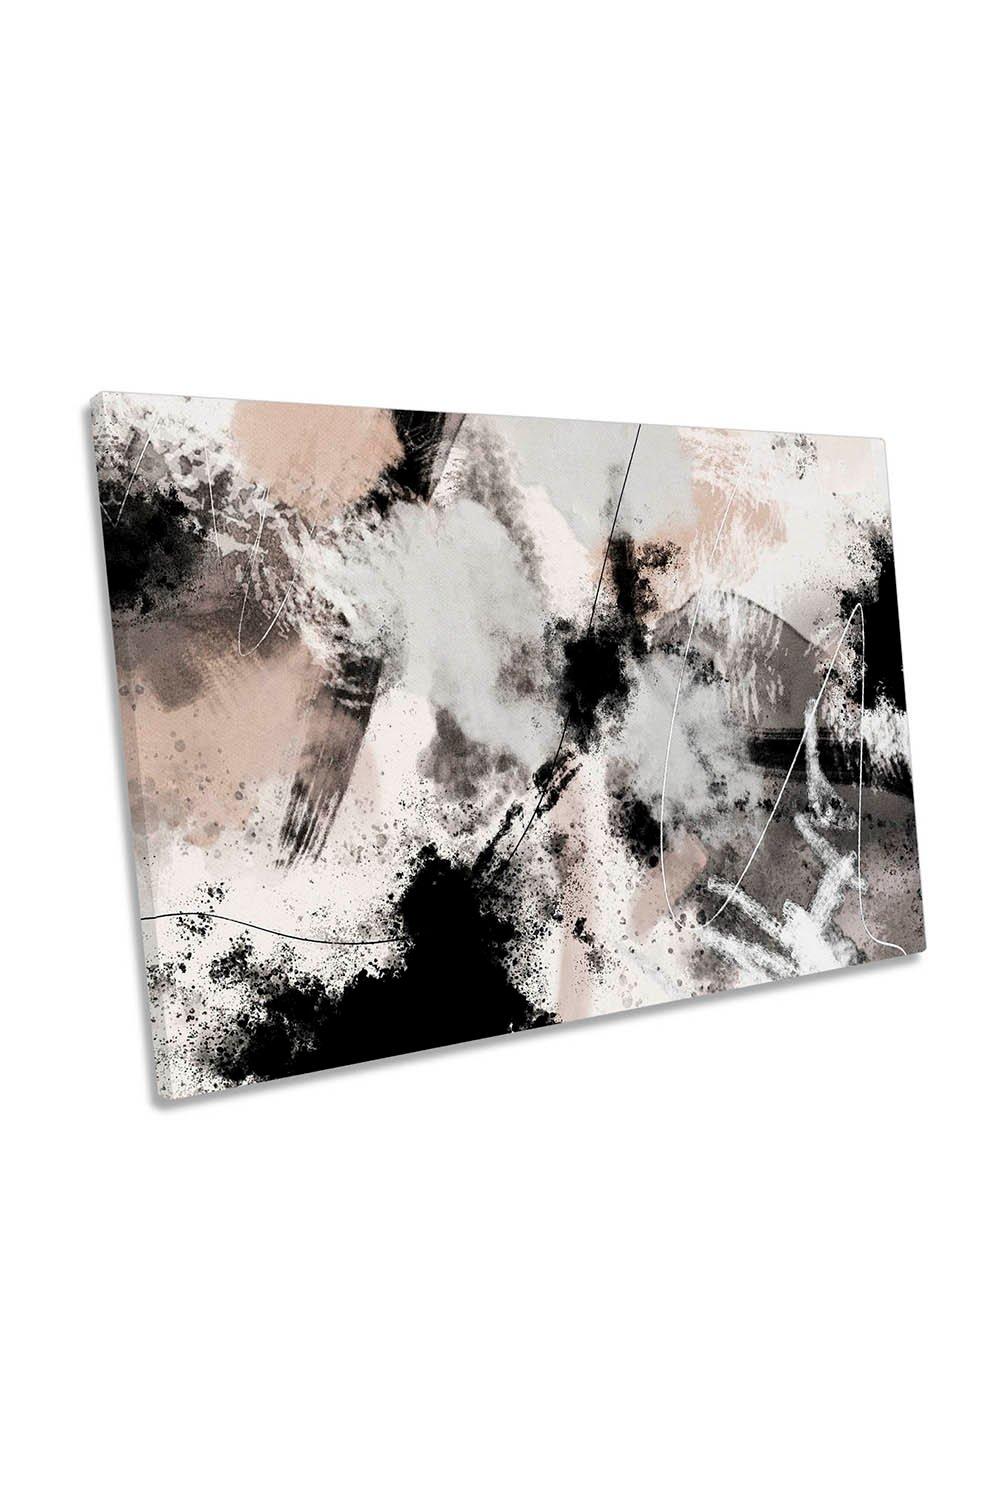 Splash Storm Abstract Design Canvas Wall Art Picture Print